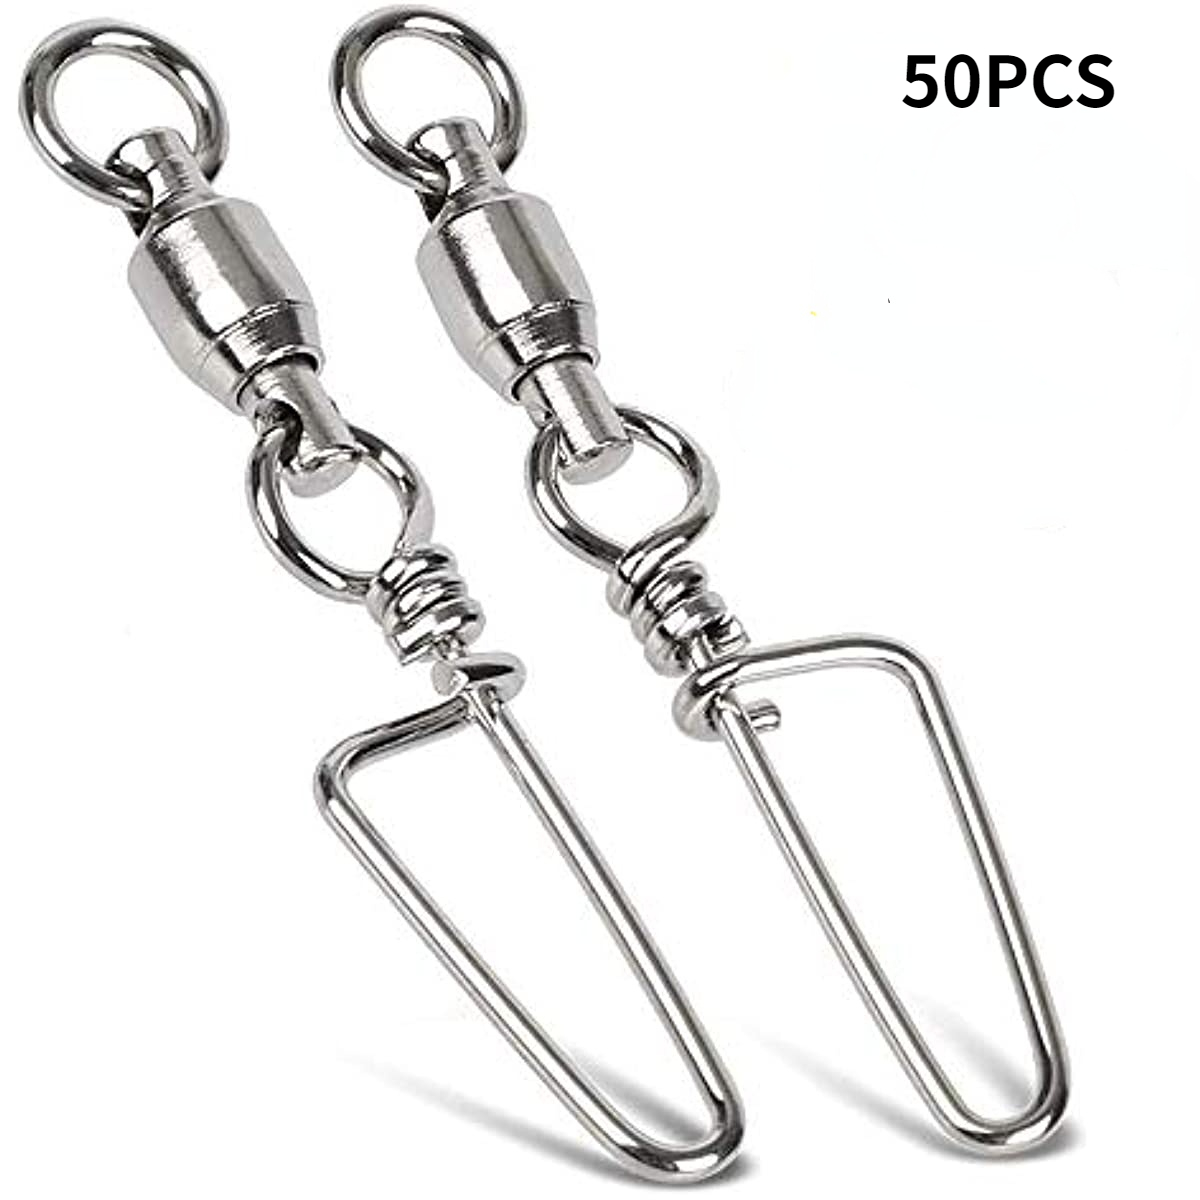 50pcs Stainless Steel Fishing Swivels - High Speed Trolling Connector Clips  with Ball Bearing Swivel Snap Coastlock